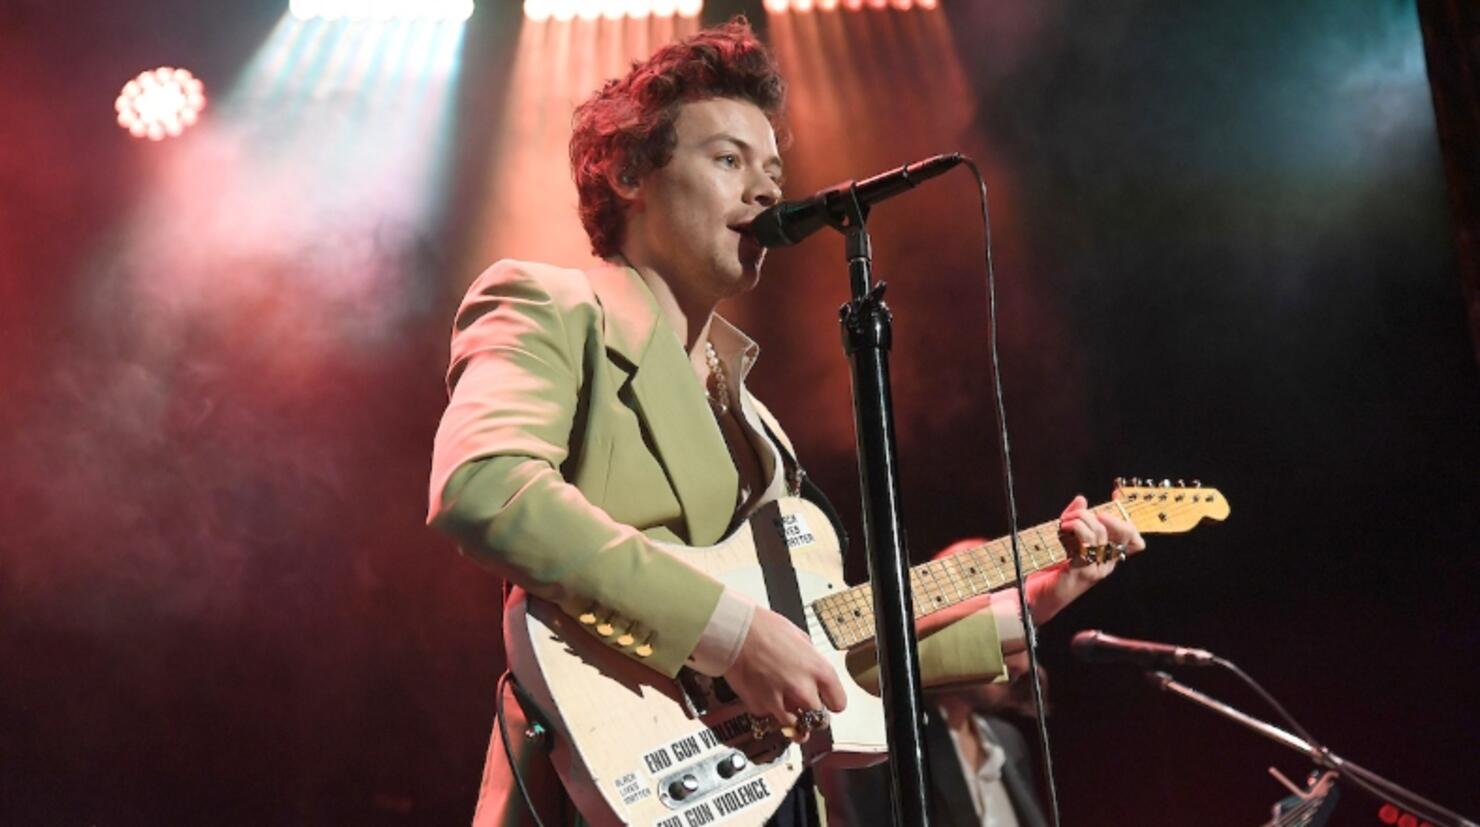 Harry Styles: Fine Line review – idiosyncratic pop with heart and